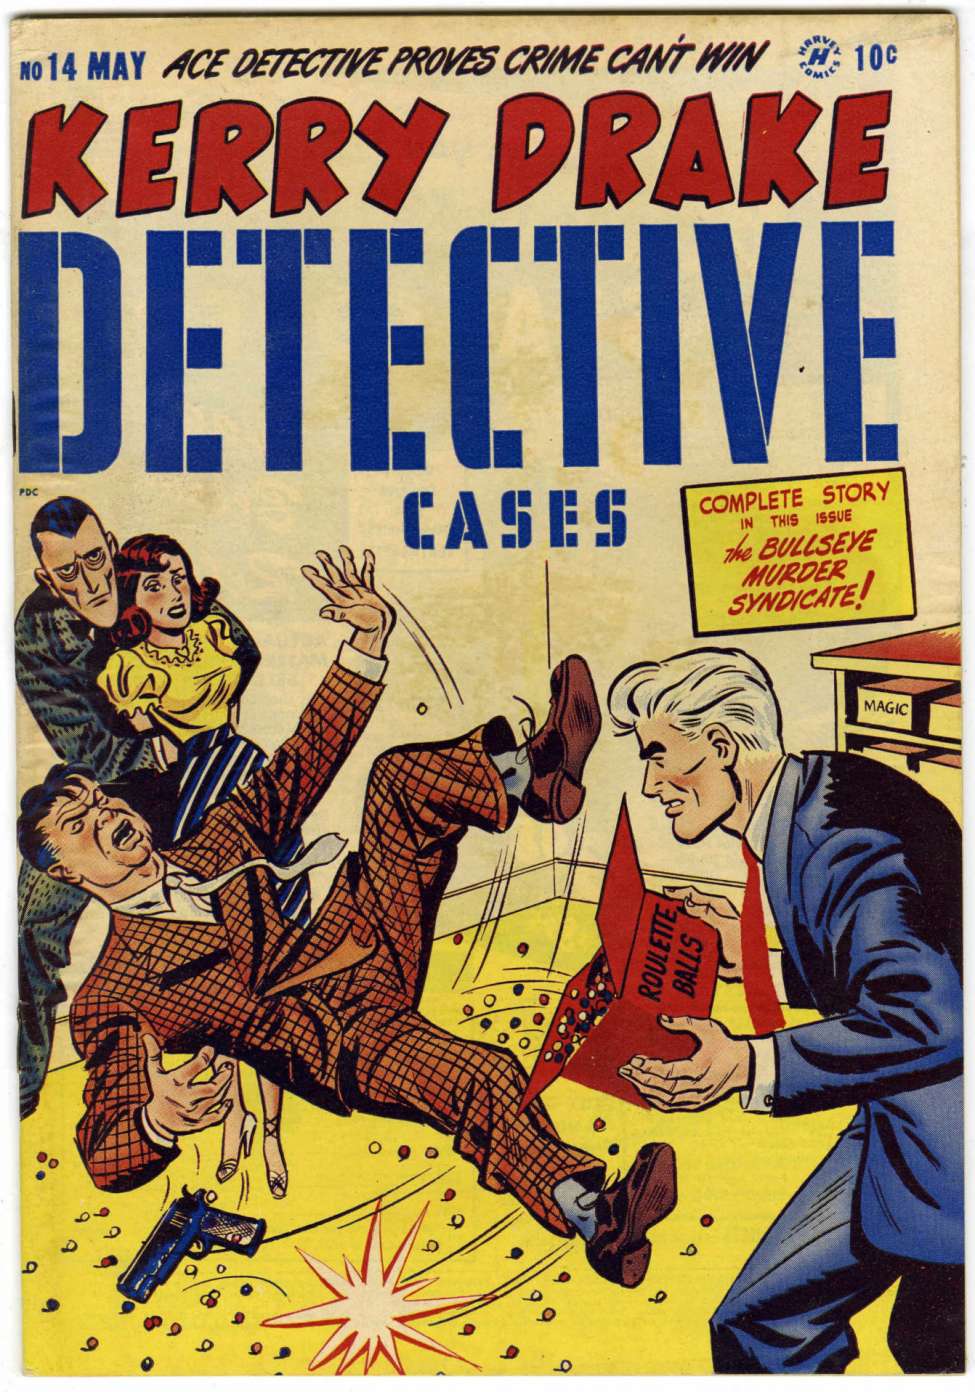 Book Cover For Kerry Drake Detective Cases 14